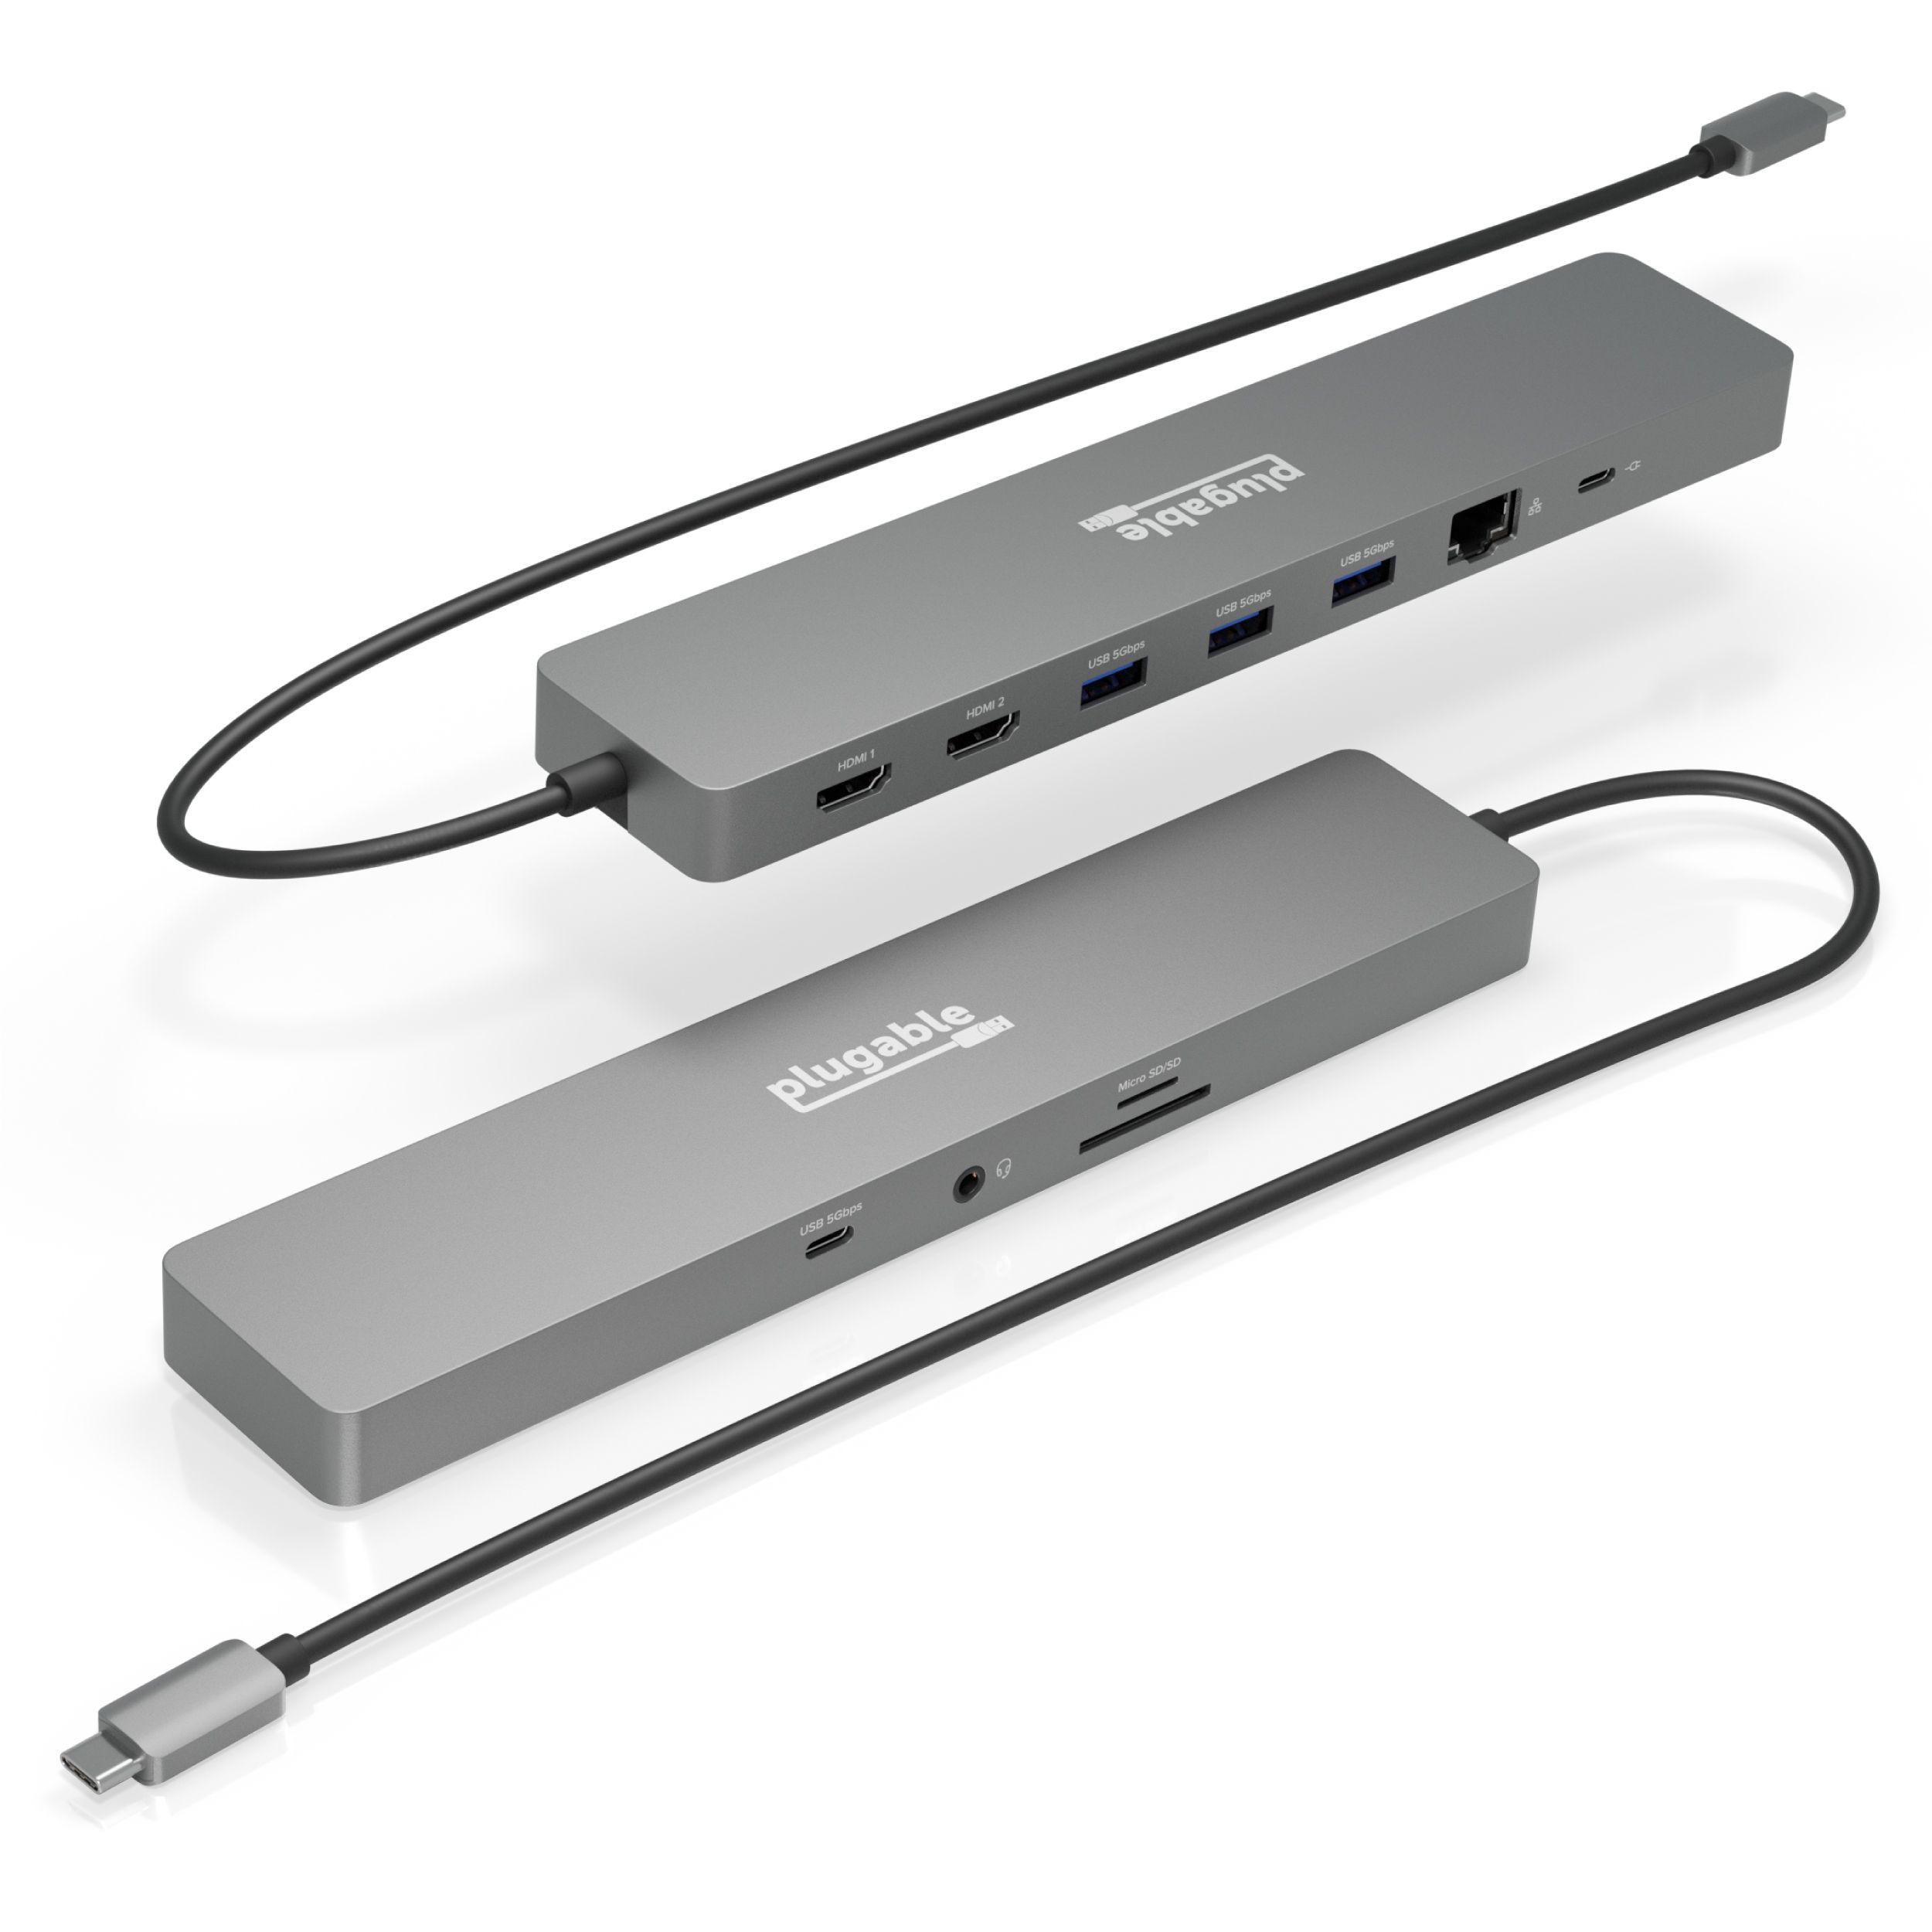 Front and rear views of the Plugable 11-in-1 USB-C hub-1